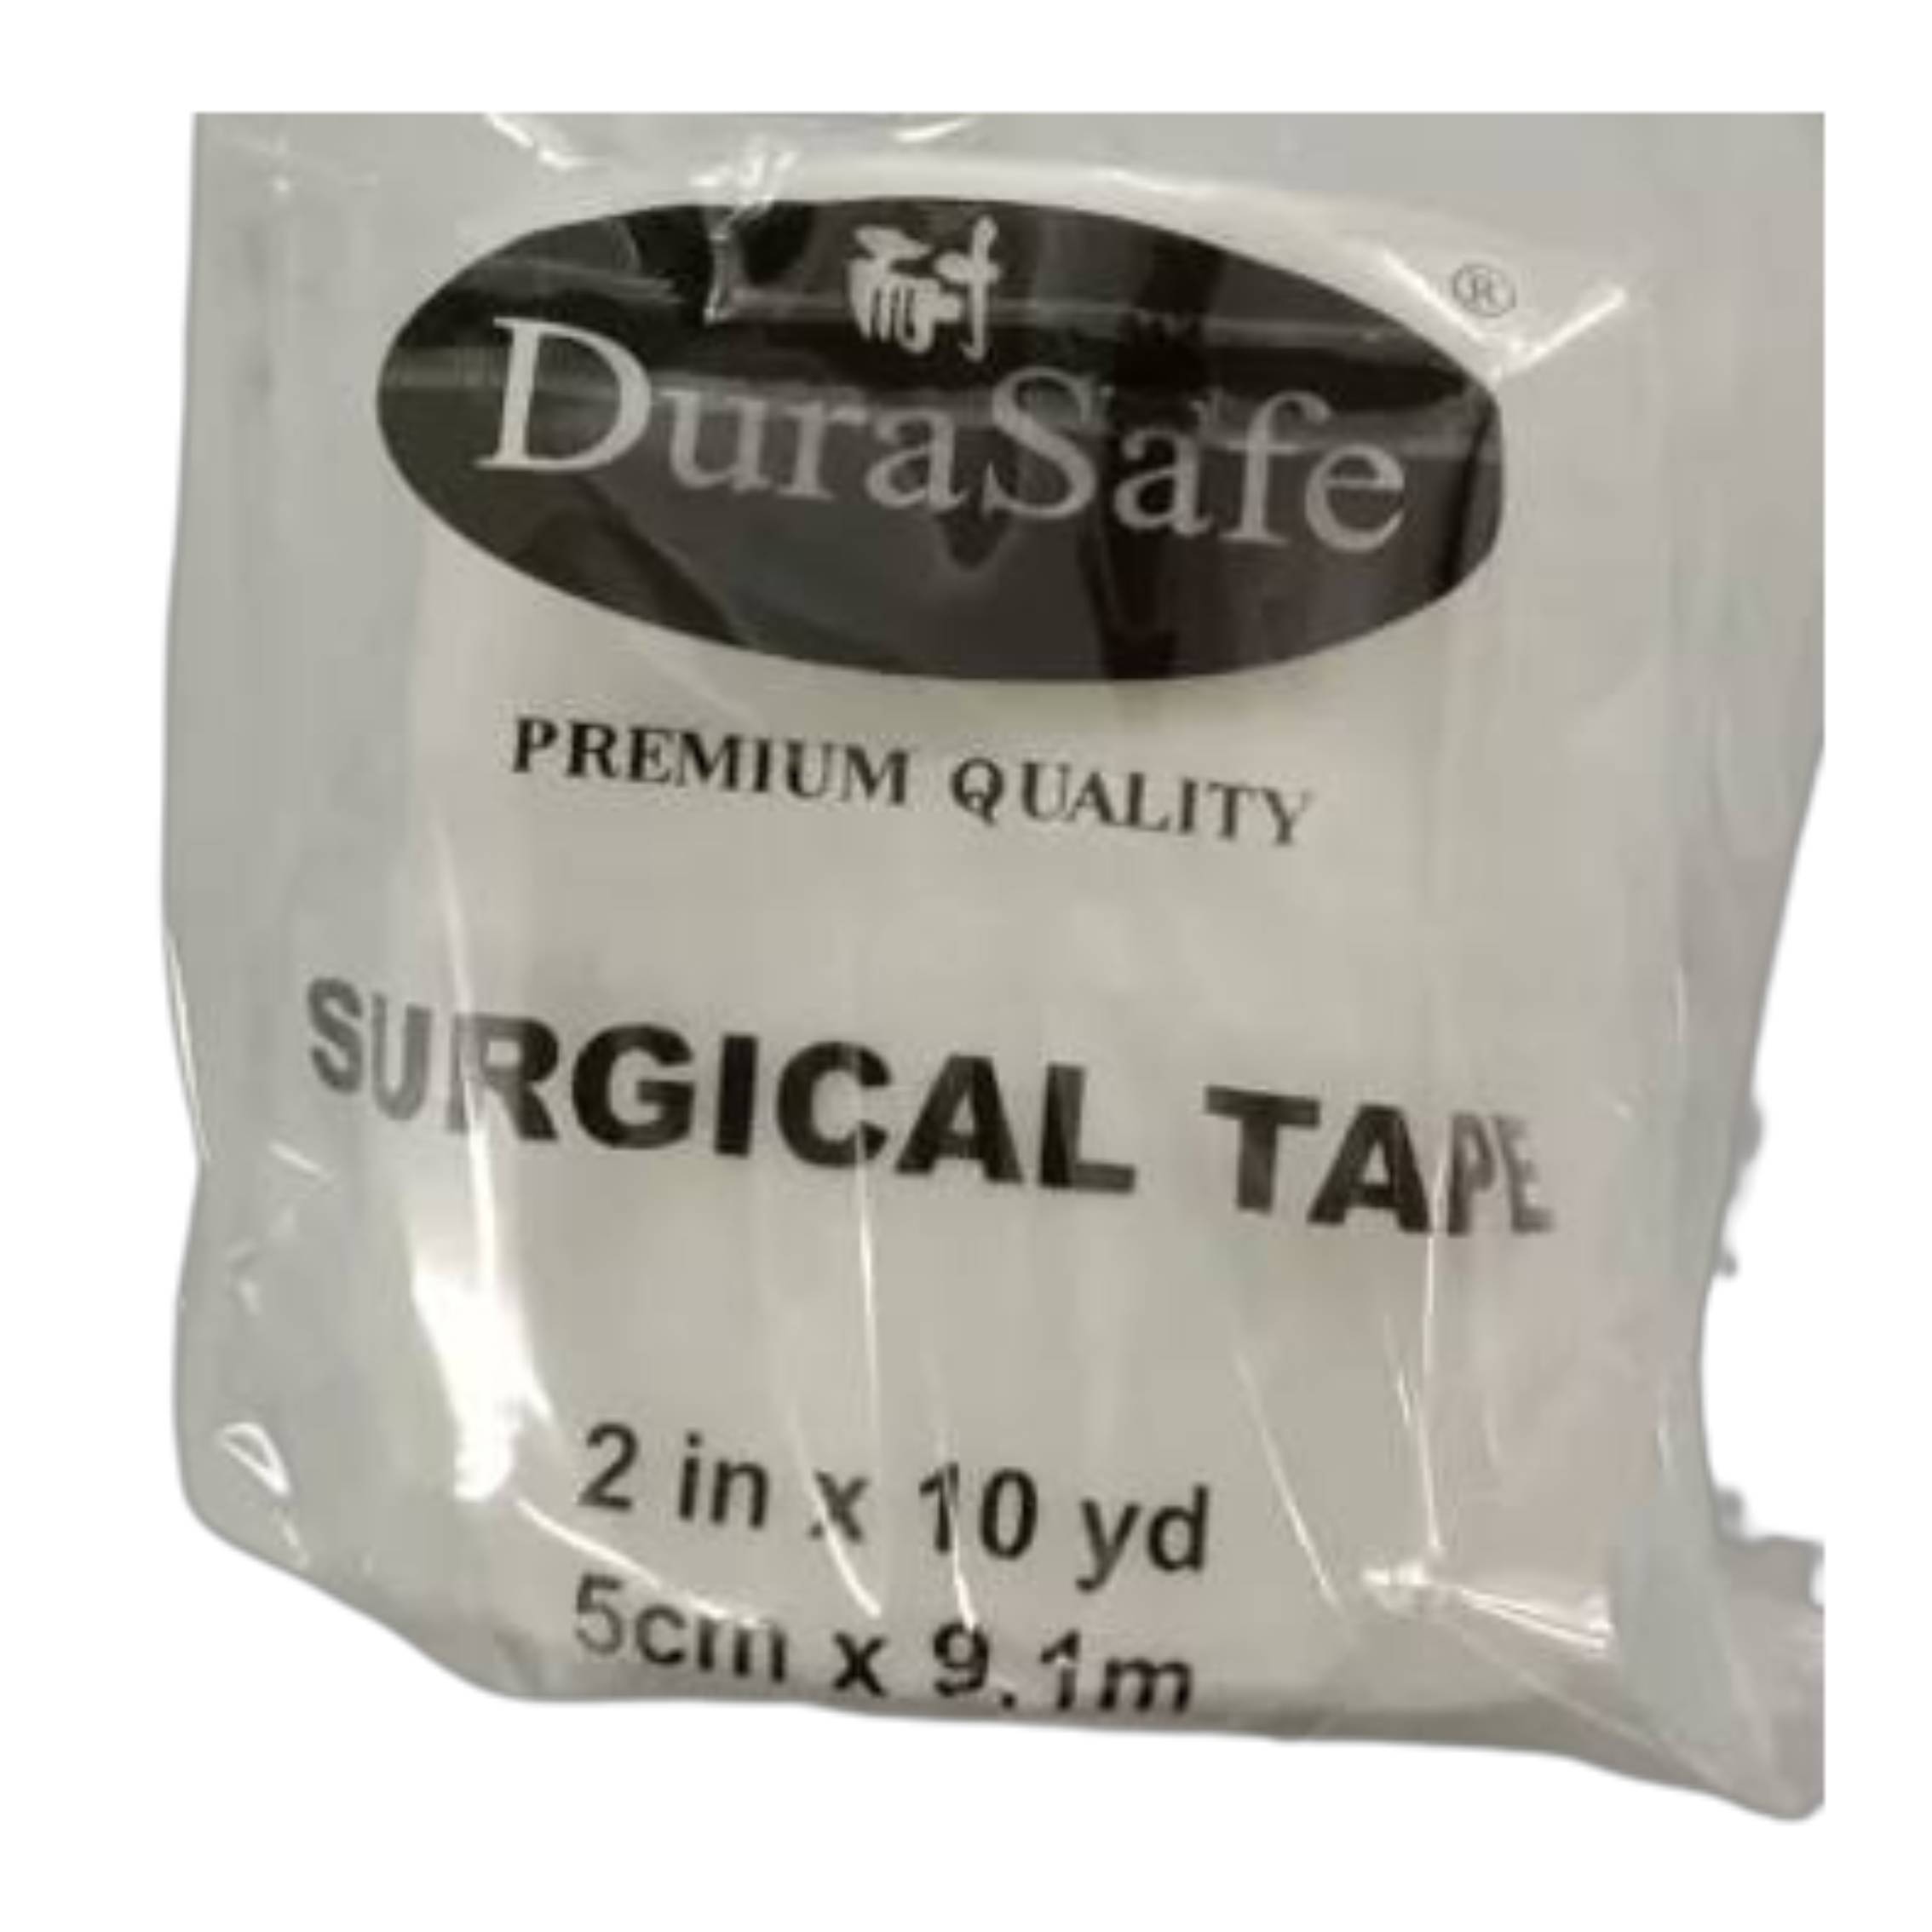 DuraSafe Surgical Tape Without Dispenser 1s 2 inches - DoctorOnCall Online Pharmacy